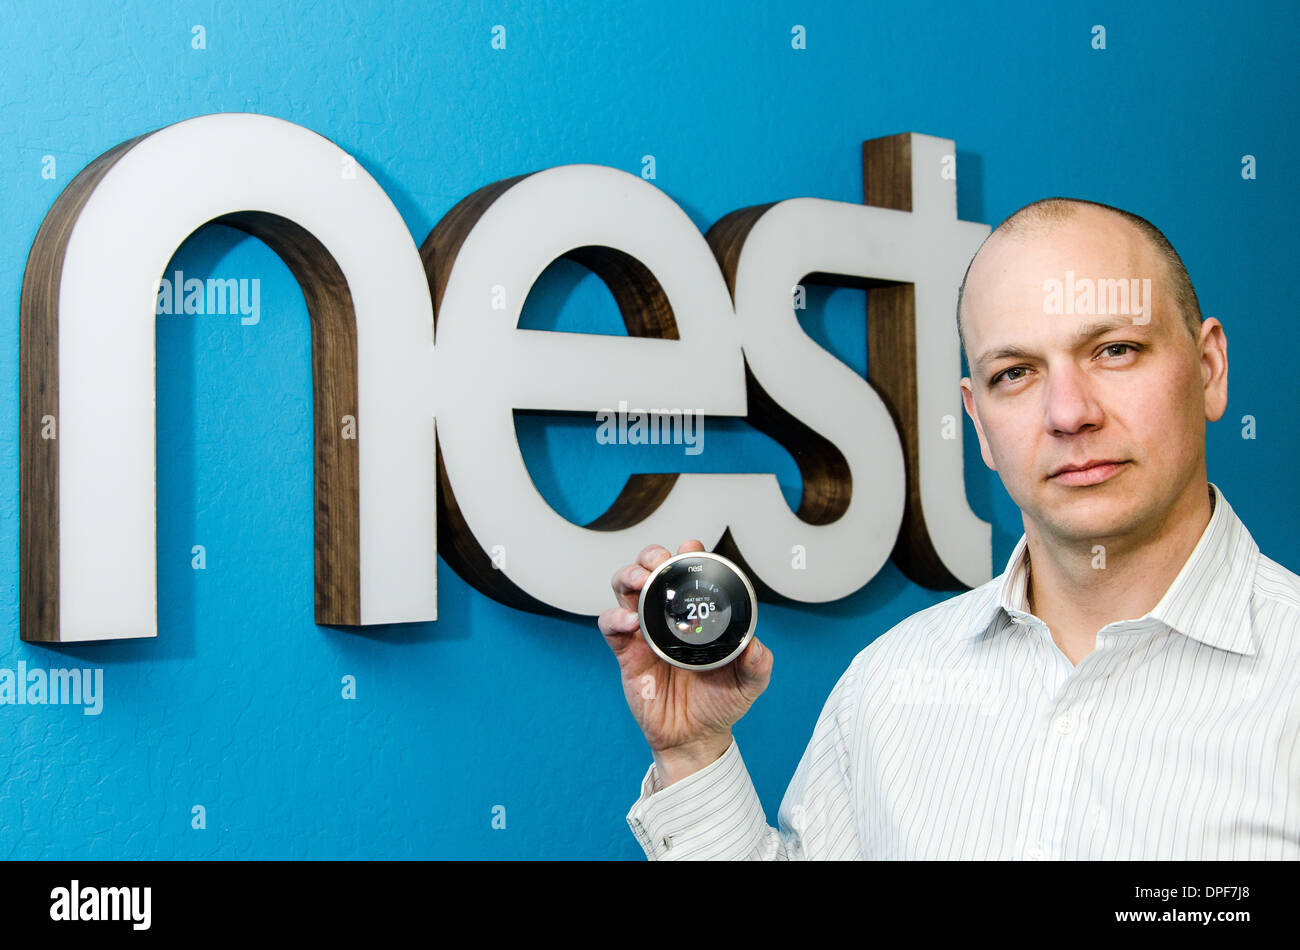 Smart appliances: At Apple, Tony Fadell helped develop both iPod and iPhone. He co-founded Silicon Valley start-up Nest, which develops intelligent appliances, such as the Nest thermostat that Fadell shows here in front of the company logo in 2012. Stock Photo